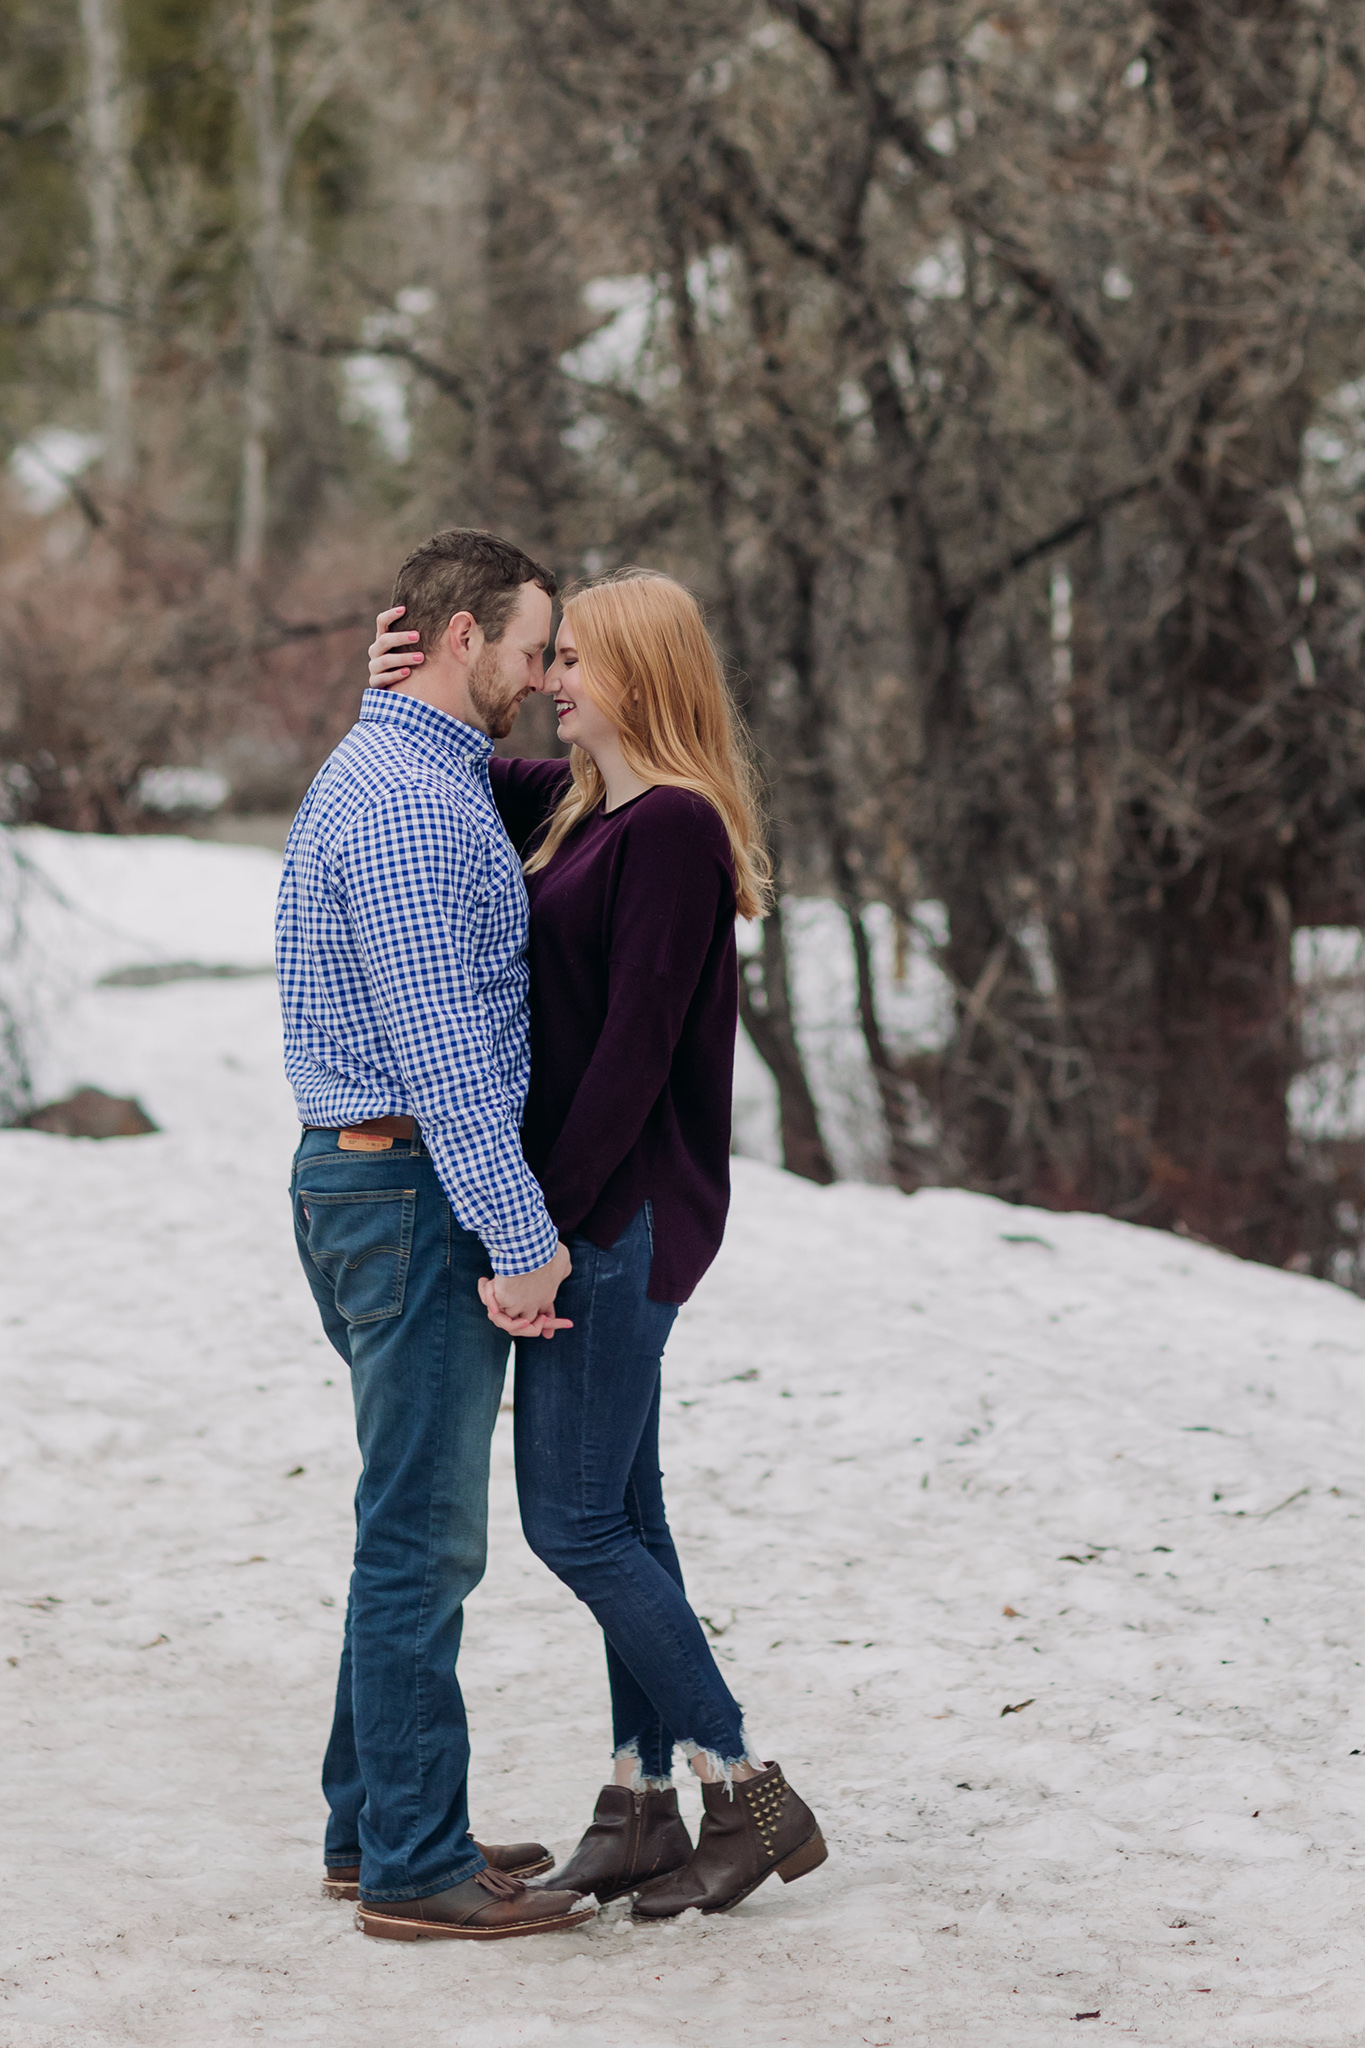 Utah Mountain Couples session in the SPring by Travelling Elopement Photographer ENV Photography